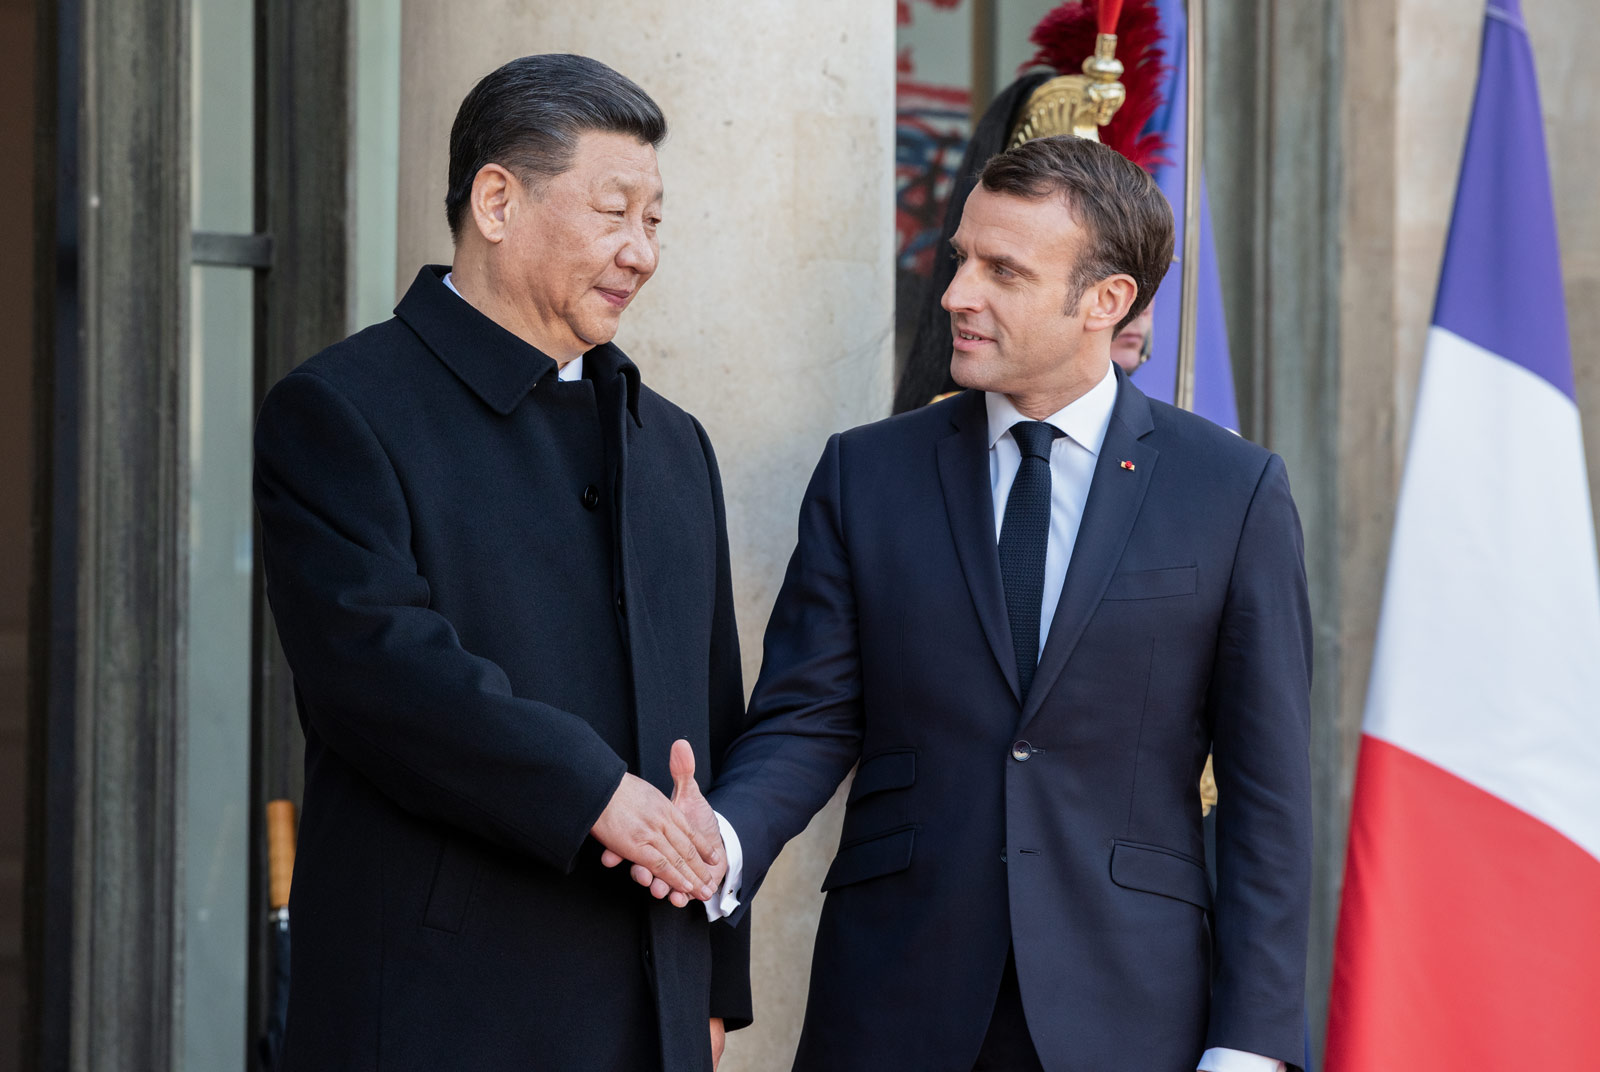 On Macron’s visit to Beijing and the challenge of finding “the European way”